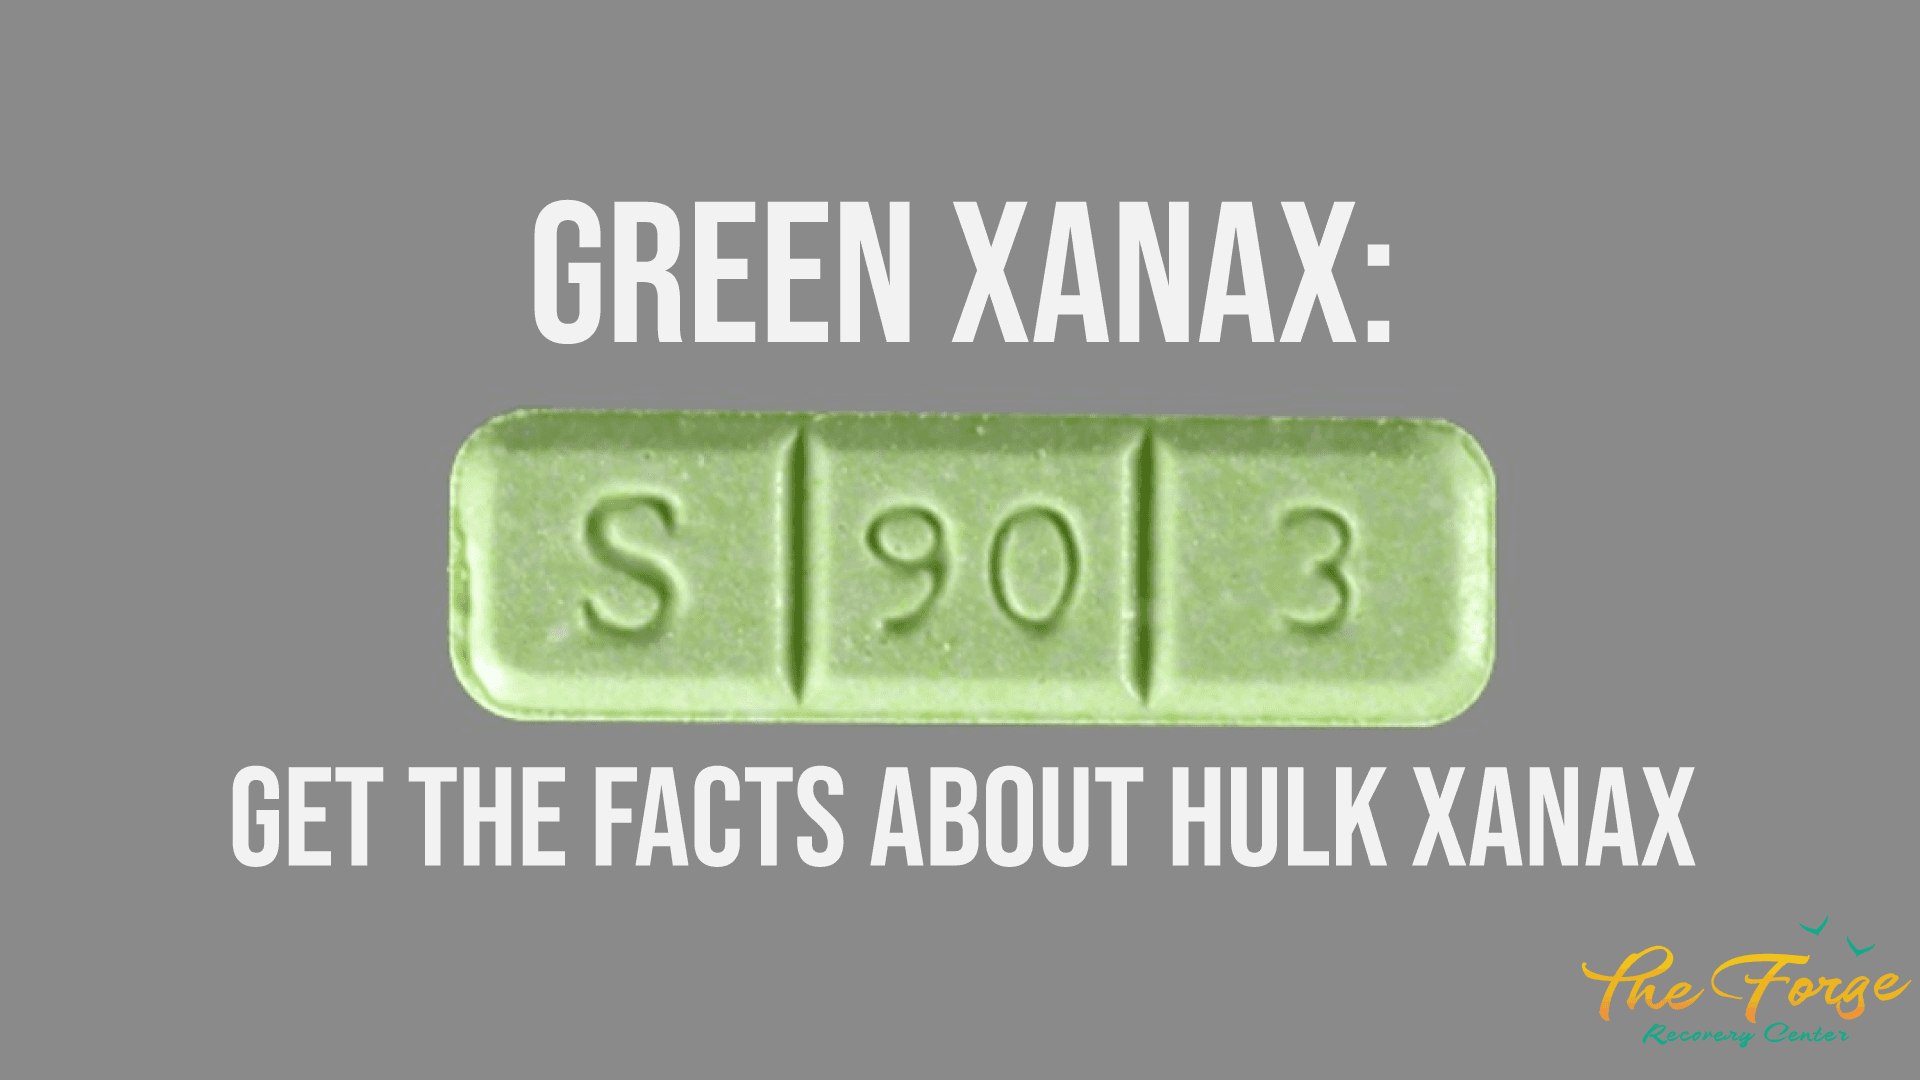 Green Xanax: Get the Facts About “Hulk Xanax” Abuse, Withdrawal, & More Today  